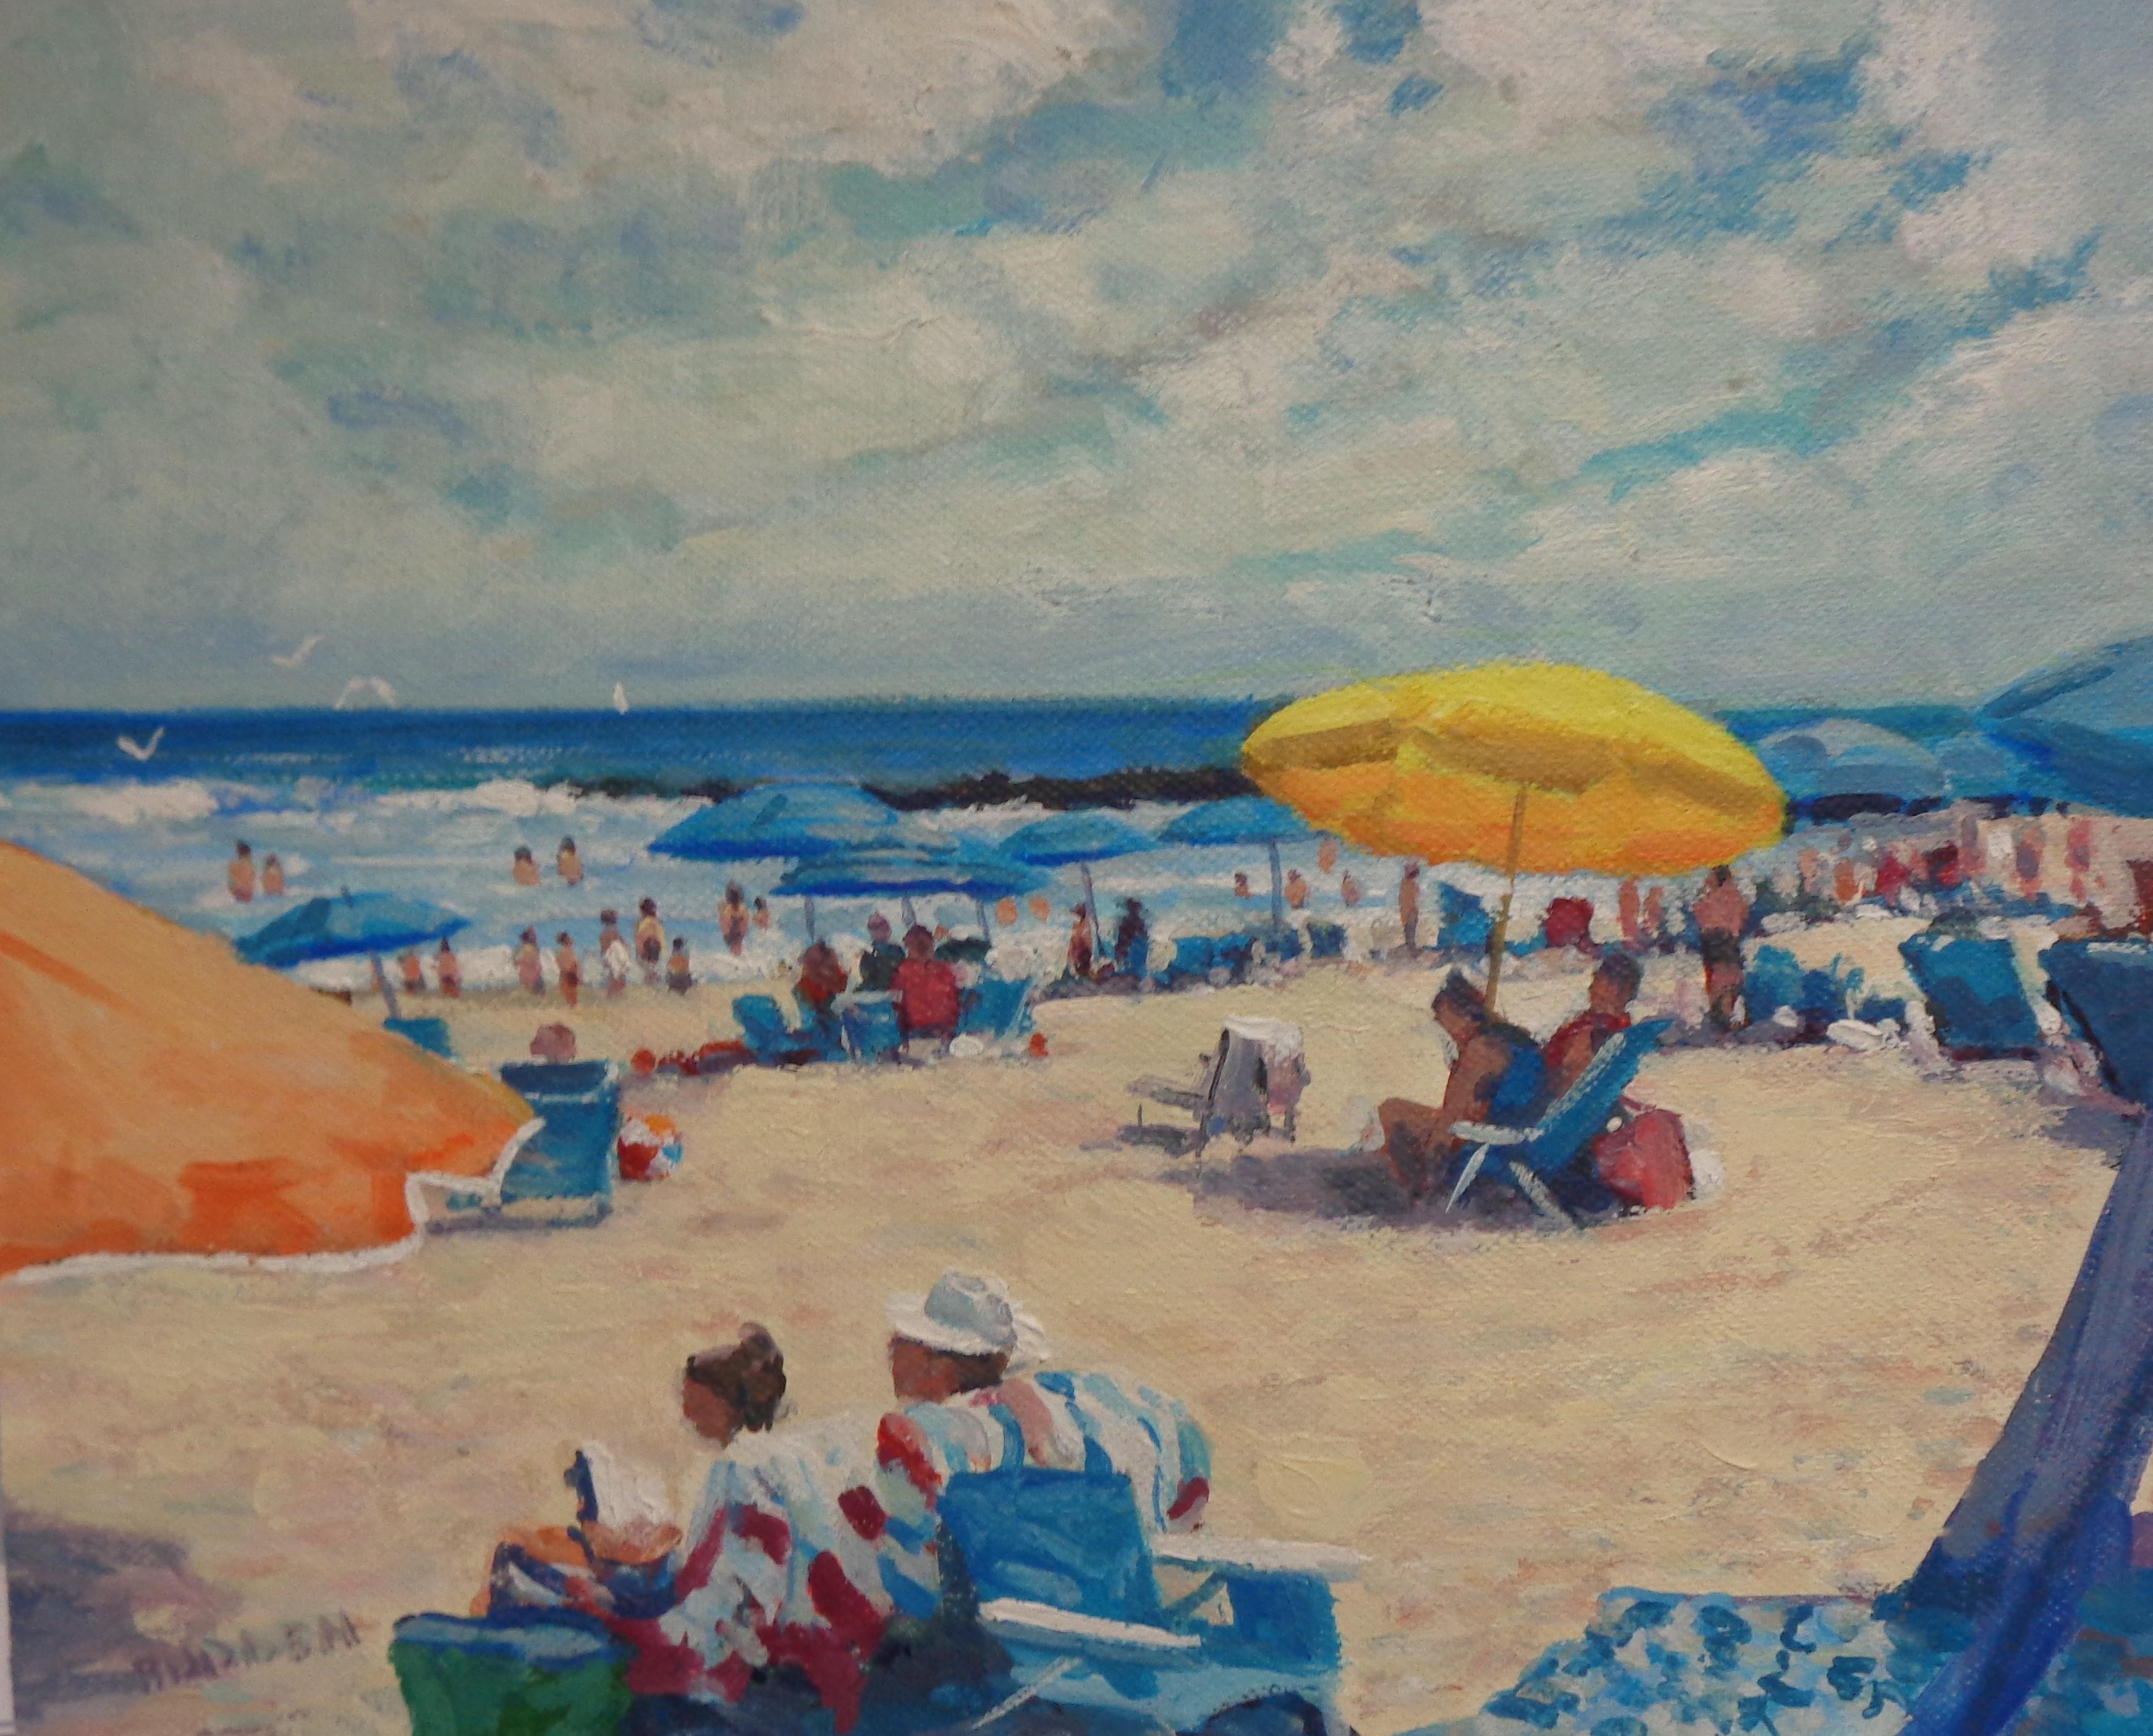  Beach Day III
oil/panel
image 8 x 10, is an oil painting on panel by award winning contemporary artist Michael Budden that showcases a beach full of summer life with people, boats, and birds. The image measures 8 x 10 unframed.
ARTIST'S STATEMENT
I